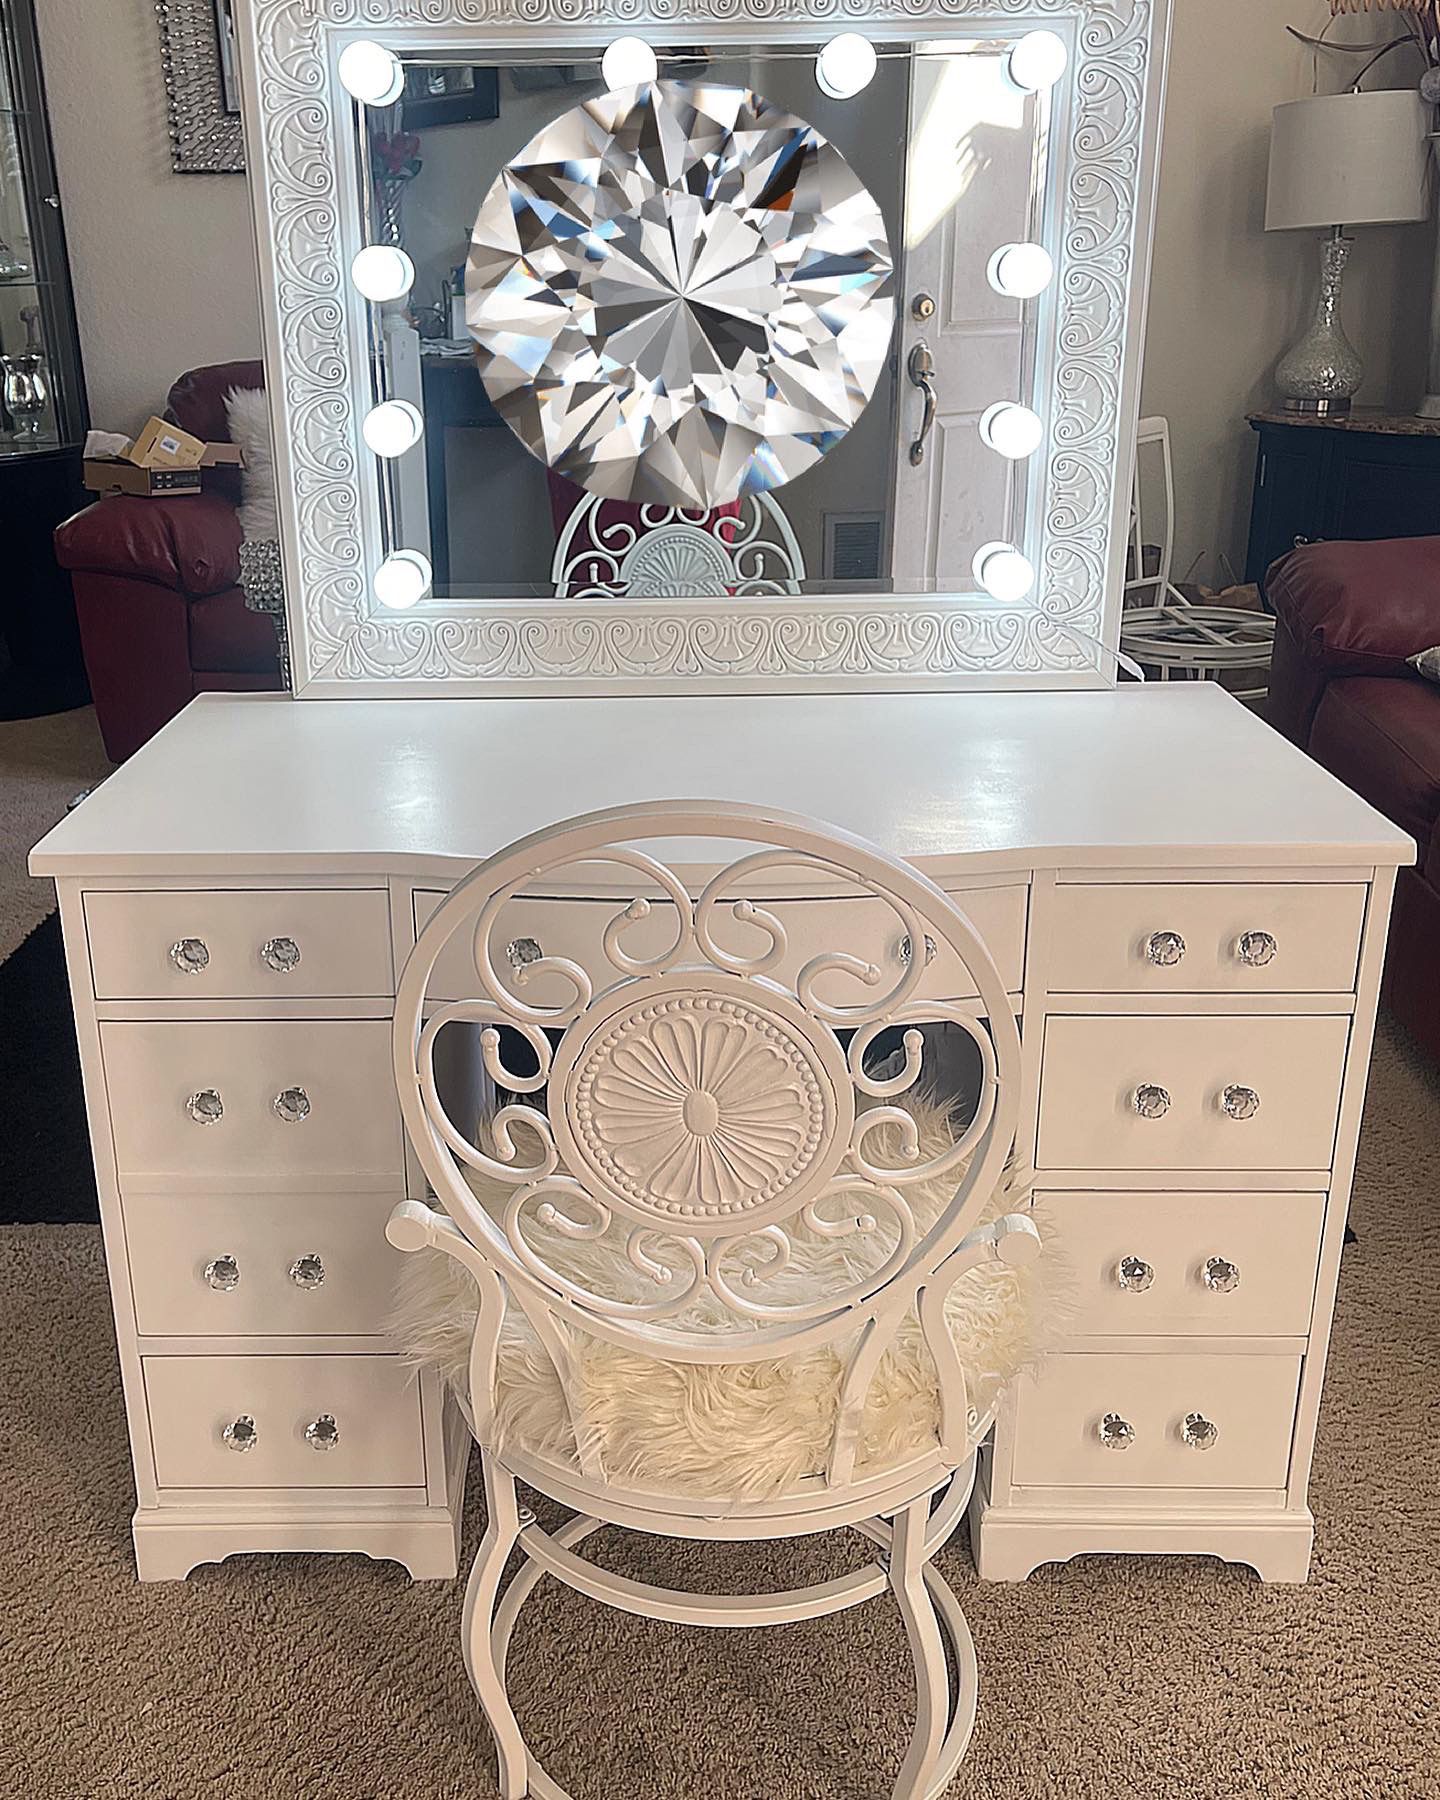 Super cute white makeup vanity set, usb/electric cord an led light up mirror, chair 🔥👀